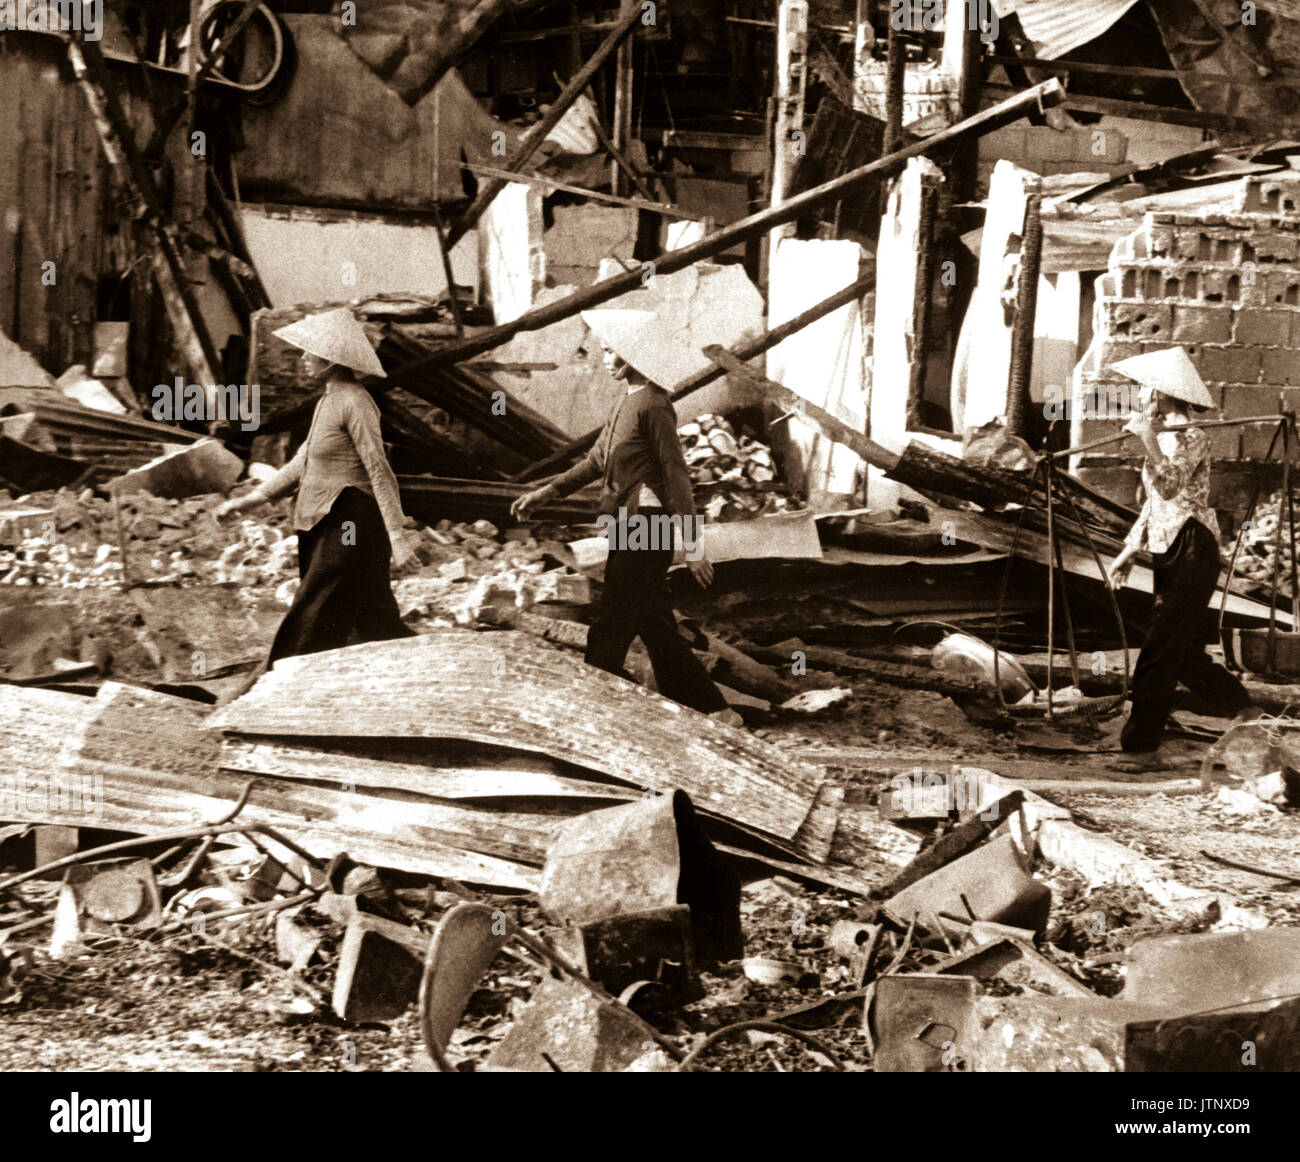 Three Vietnamese women move back into the Cholon area after VC attack that left a two-block area leveled, in hopes of salvaging meager belongings.  Saigon, January 31, 1968.  (USAIA) NARA FILE #:  306-MVP-5-4 WAR & CONFLICT BOOK #:  421 Stock Photo